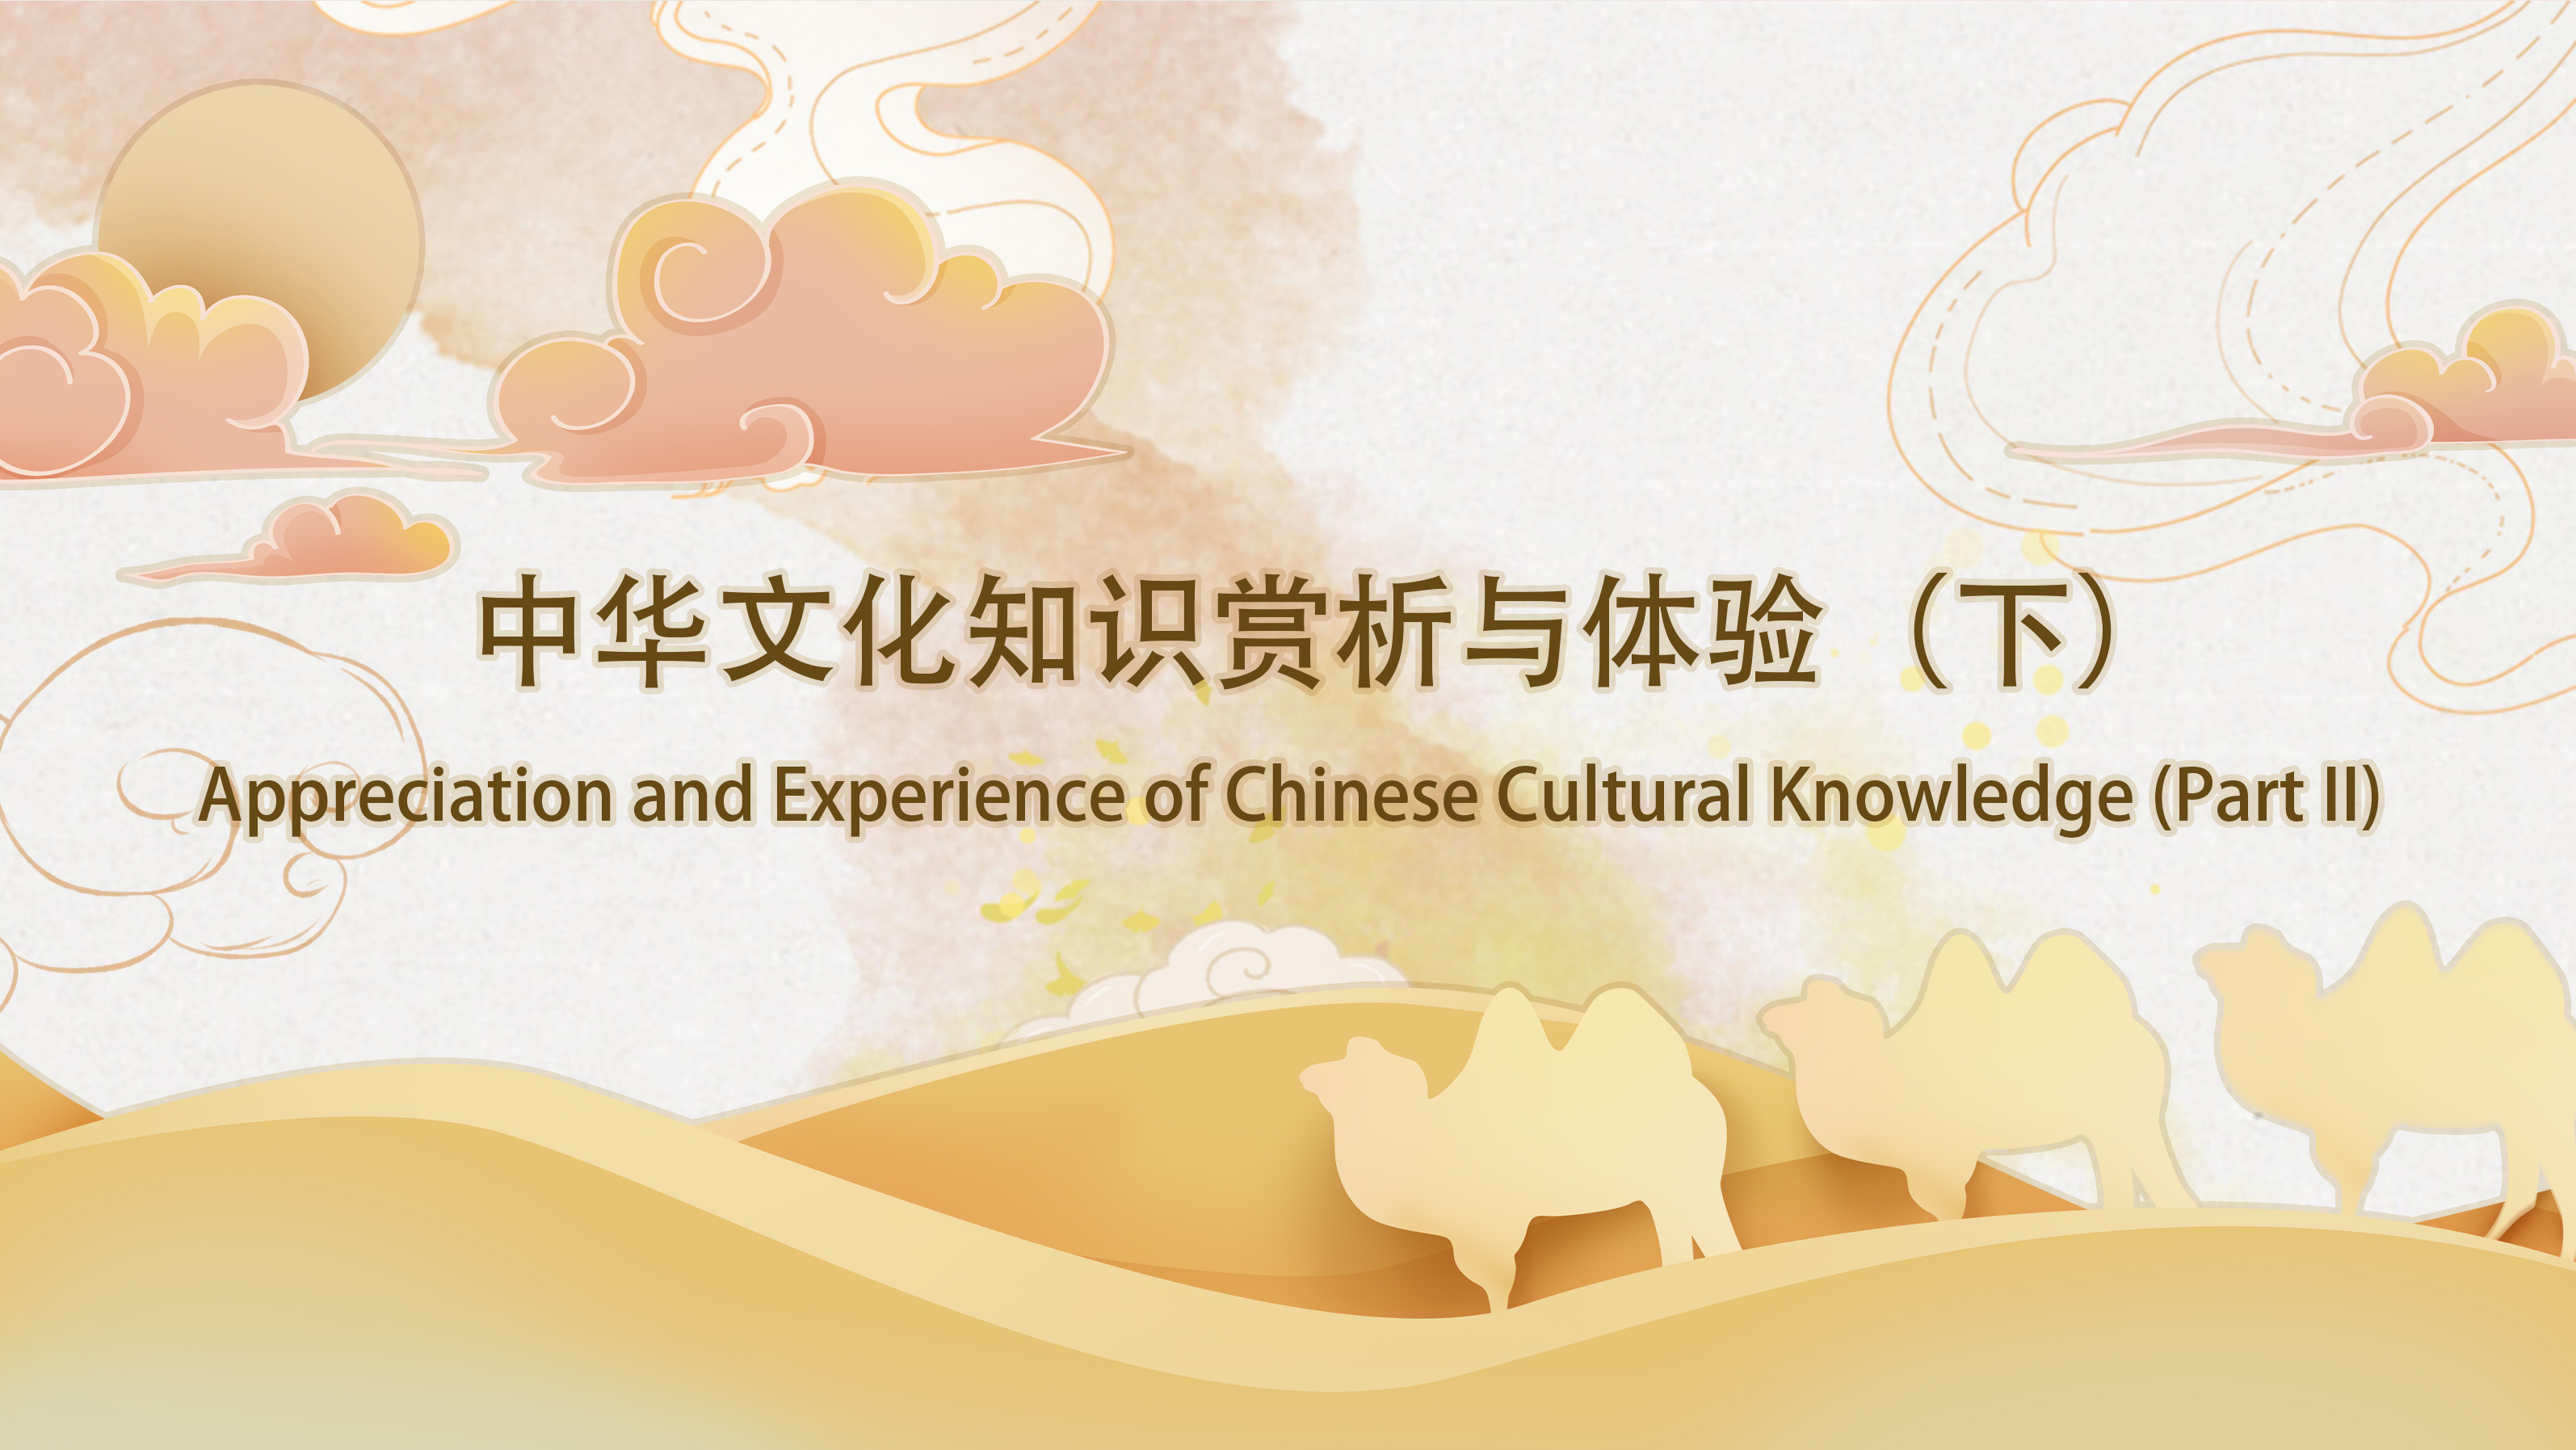 Appreciation and Experience of Chinese Cultural Knowledge (Part II)